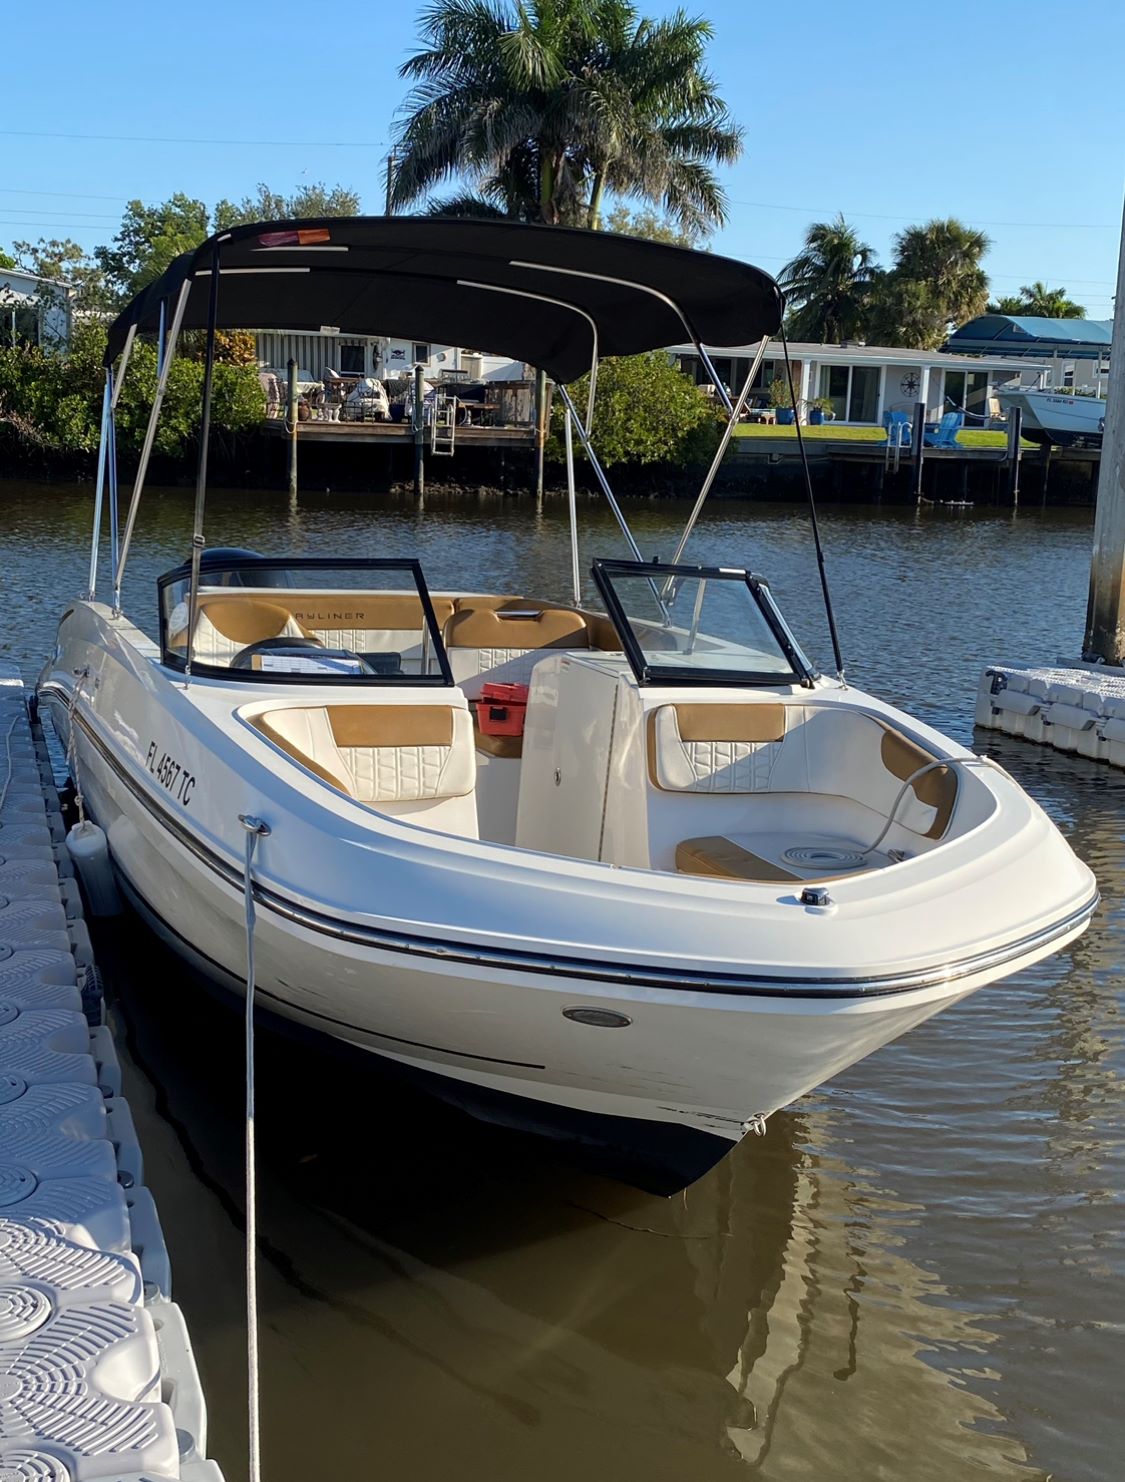 LUCKY LADY  (Bayliner 22' Deck Boat 150 HP - Cruising)